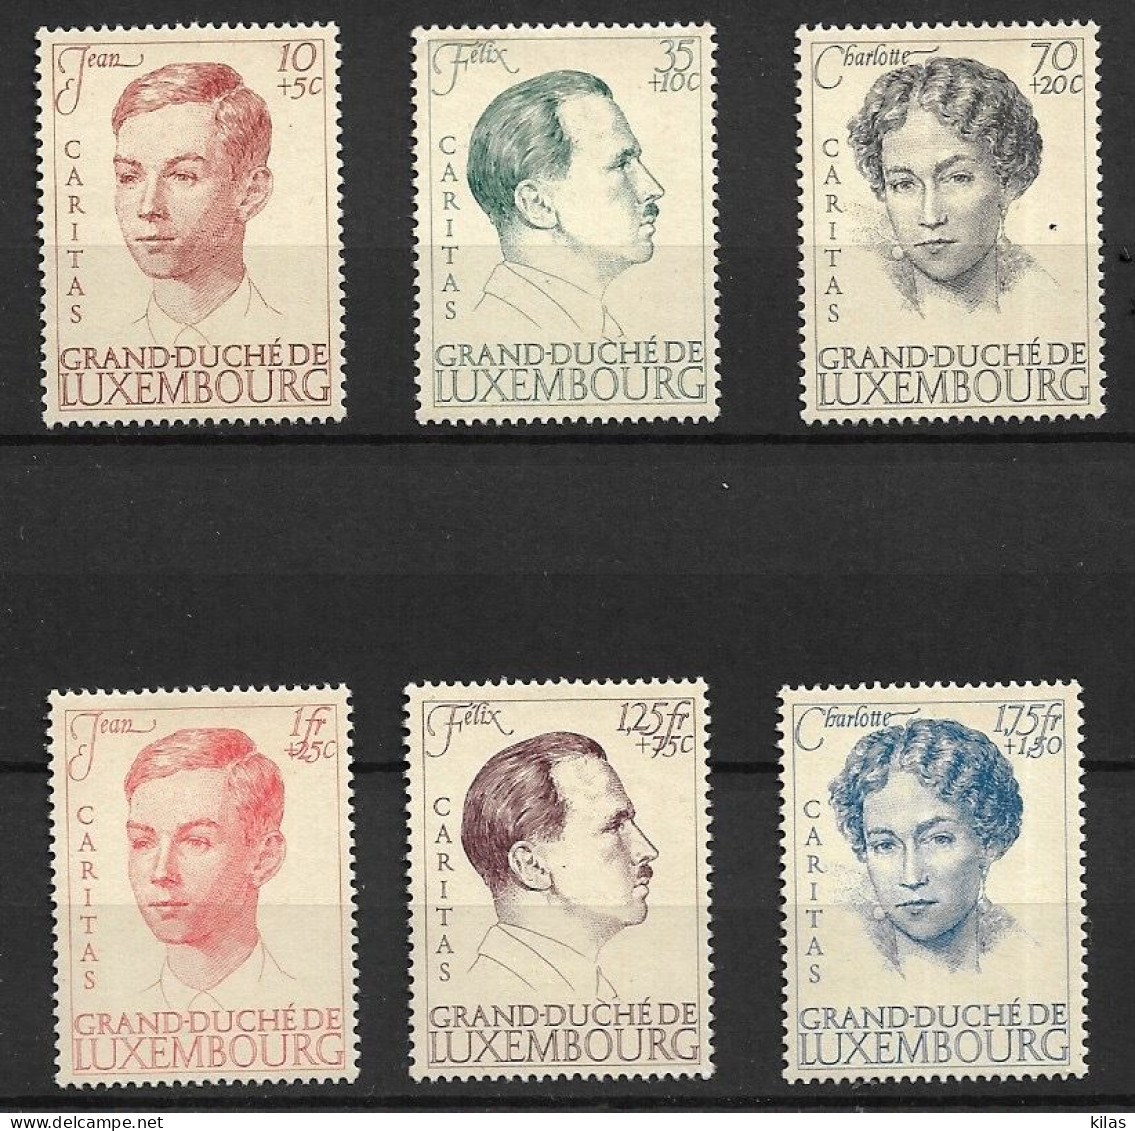 LUXEMBOURG 1939 20TH ANNIVERSARY OF THE REIGN OF THE GRAND DUCHESS CHARLOTTE MNH - 1948-58 Charlotte Linksprofil